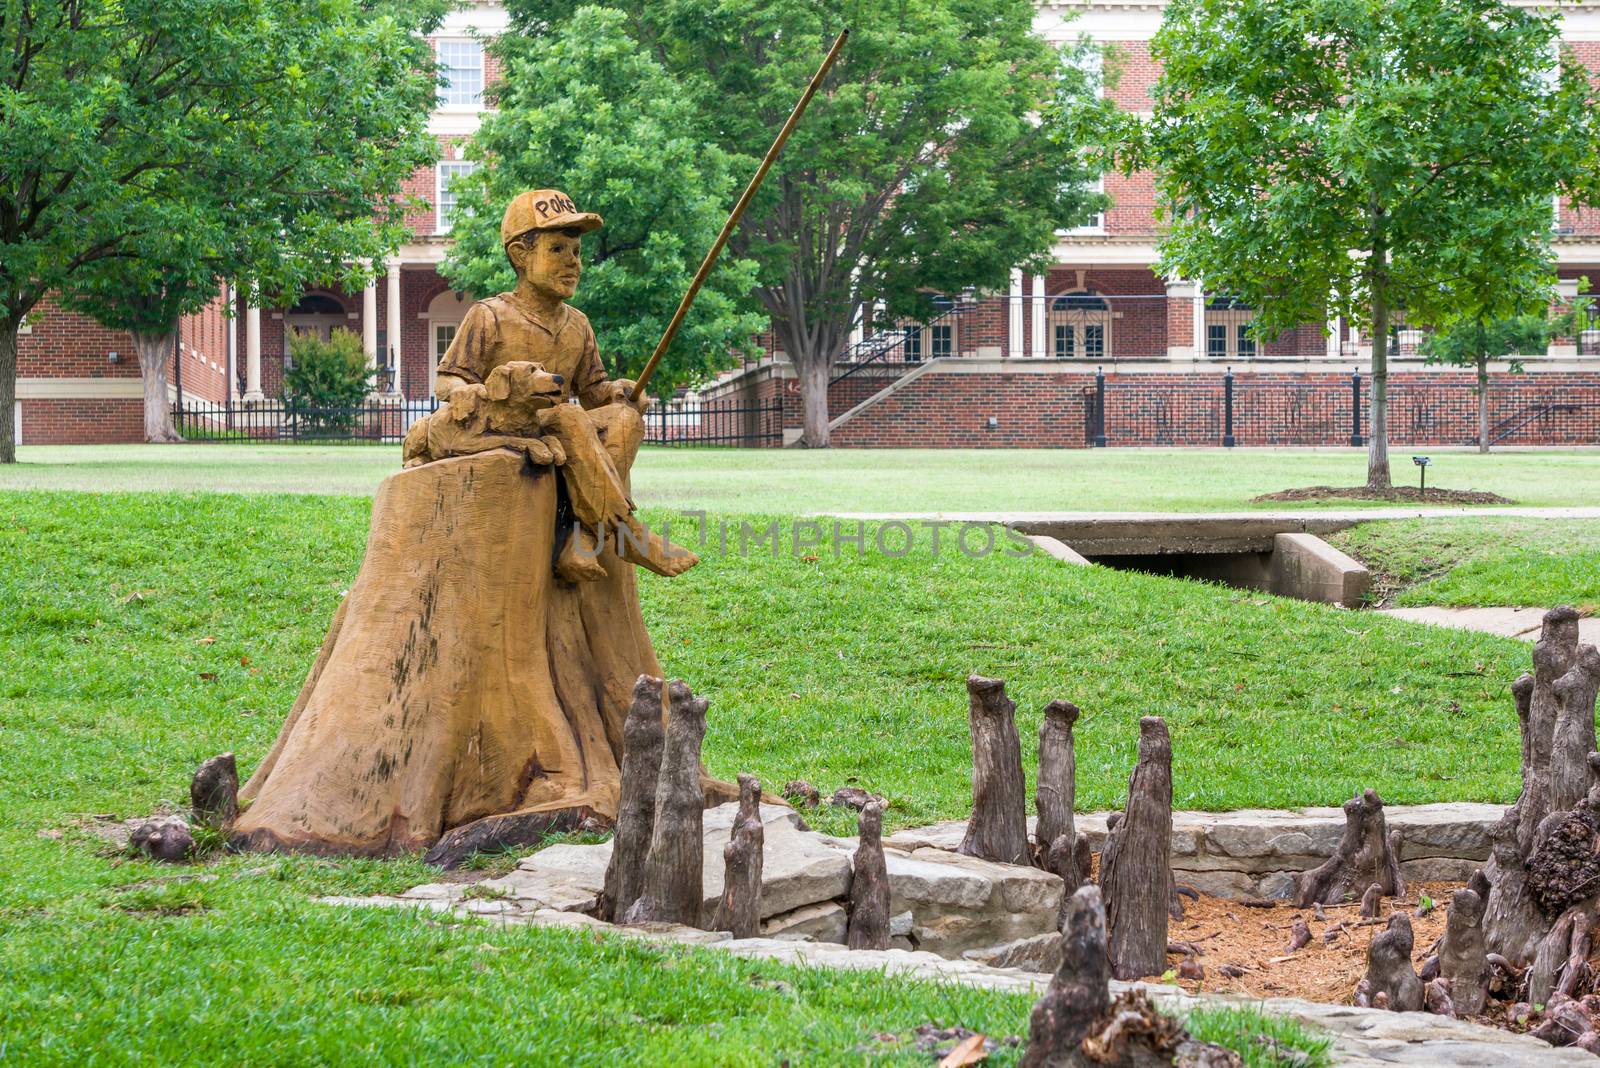 STILLWATER, OK/USA - MAY 20, 2016: Boy and Dog Fishing Sculpture at Theta Pond on the campus of Oklahoma State University.